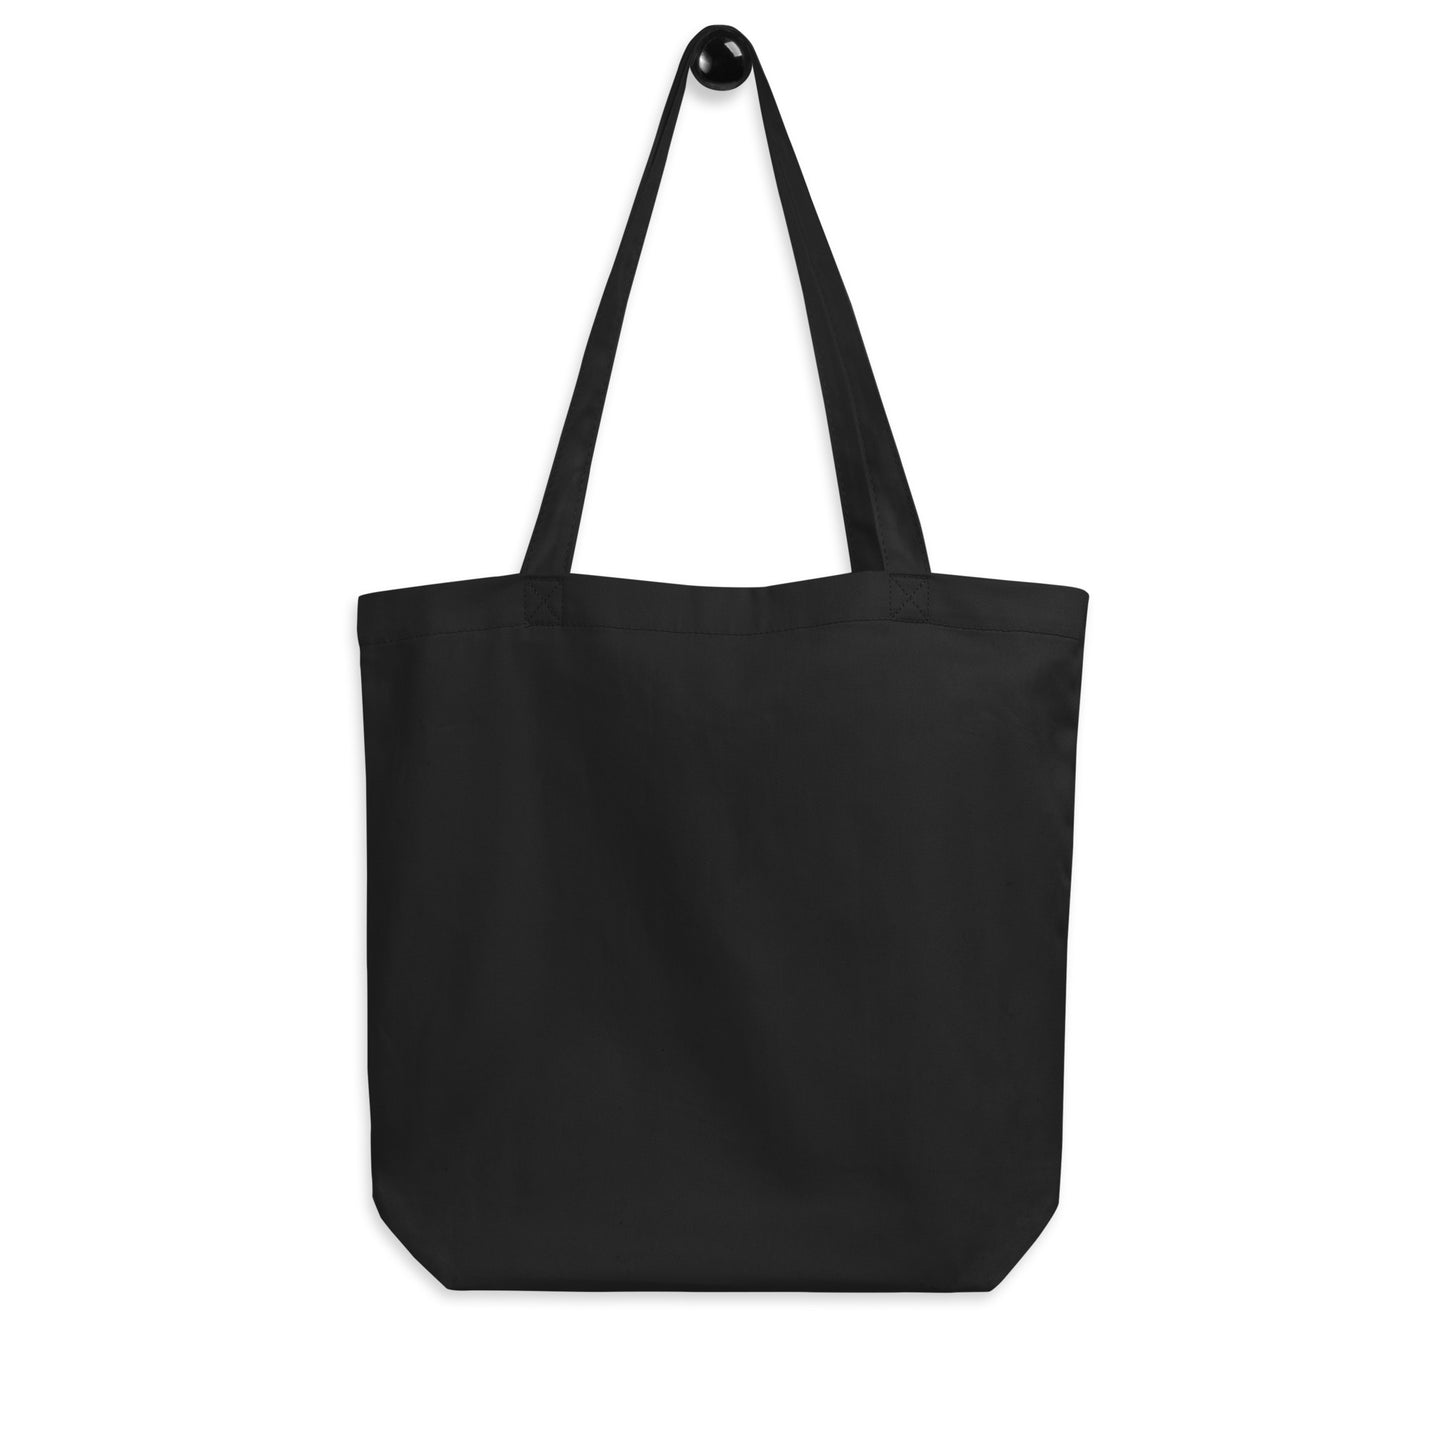 Unique Travel Gift Organic Tote - White Oval • SYD Sydney • YHM Designs - Image 06